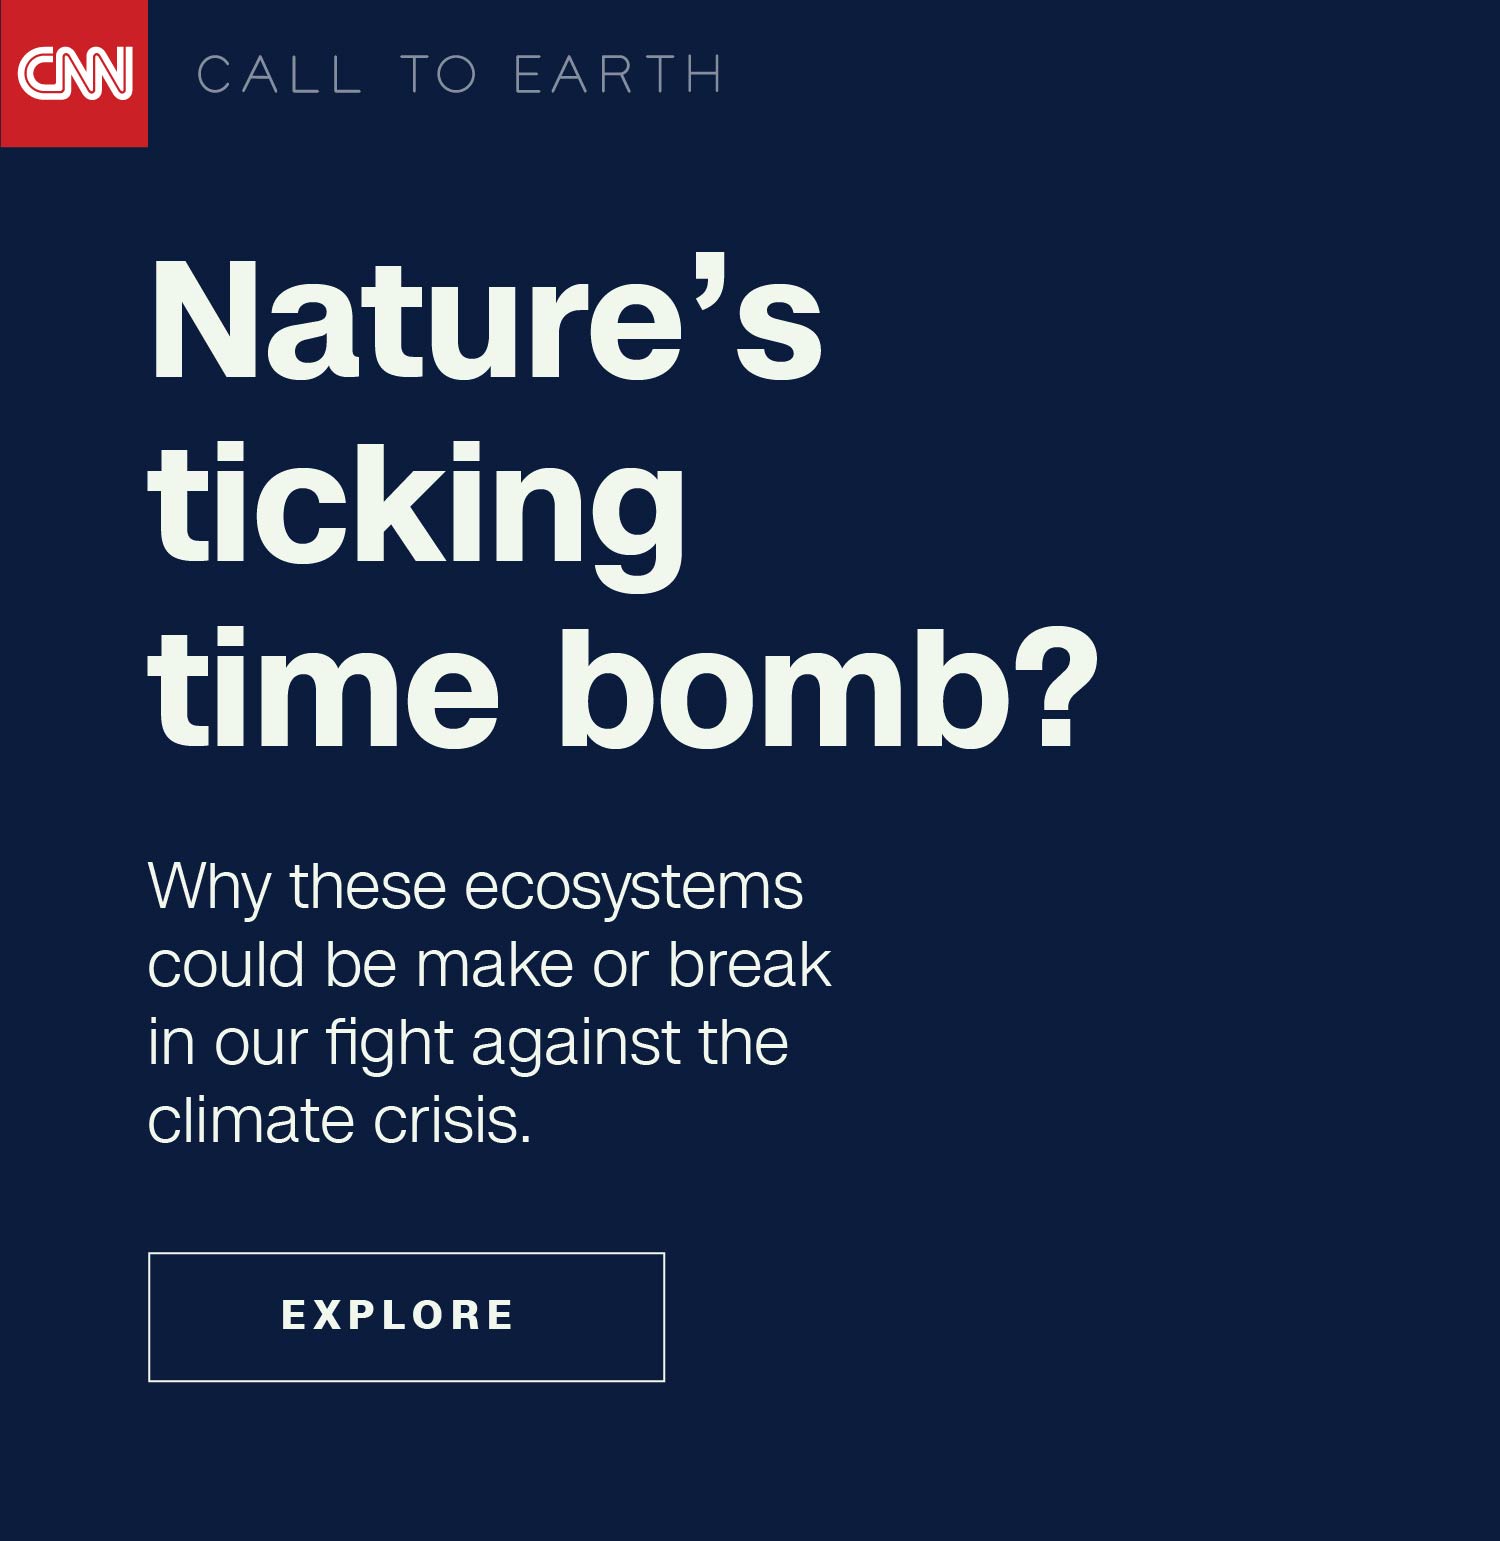 Time bomb of nature?